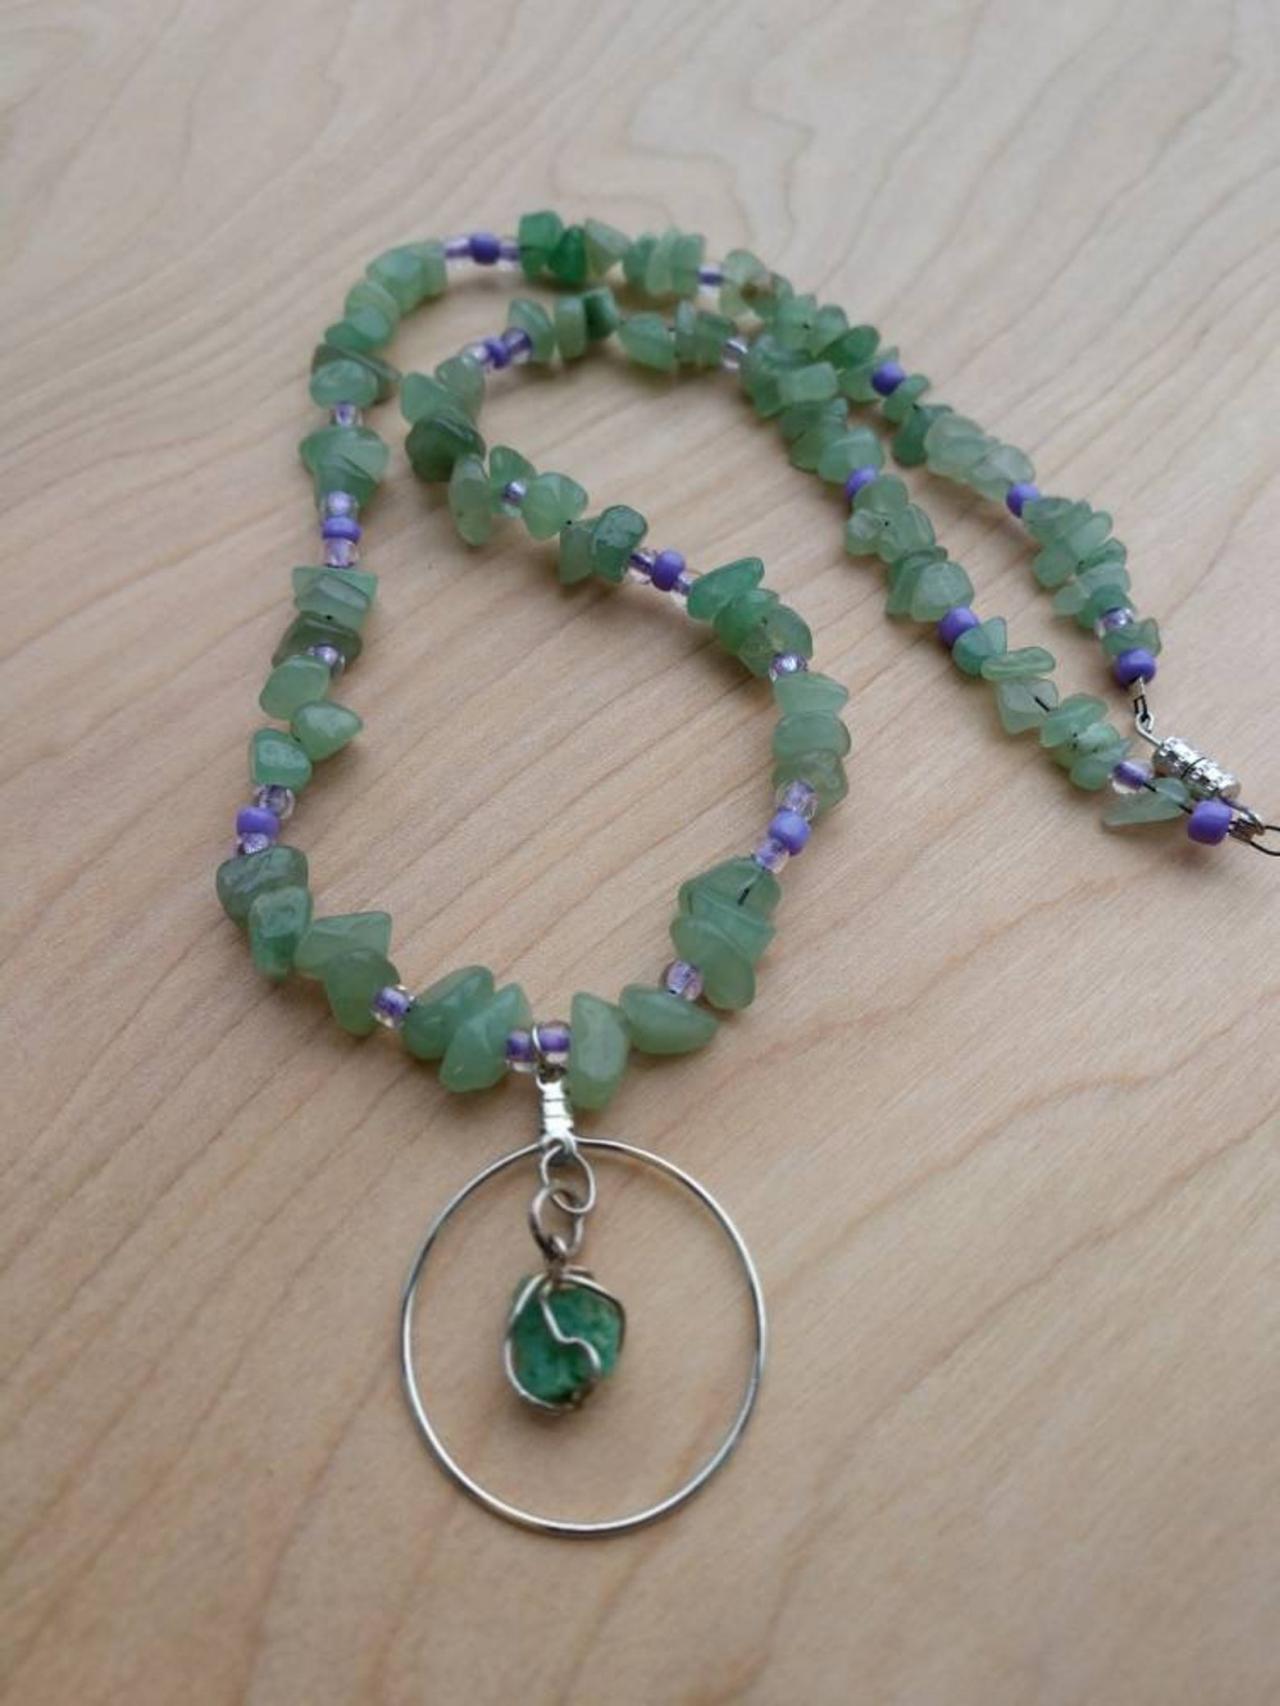 Handcrafted gemstone and glass beaded necklace with pendant